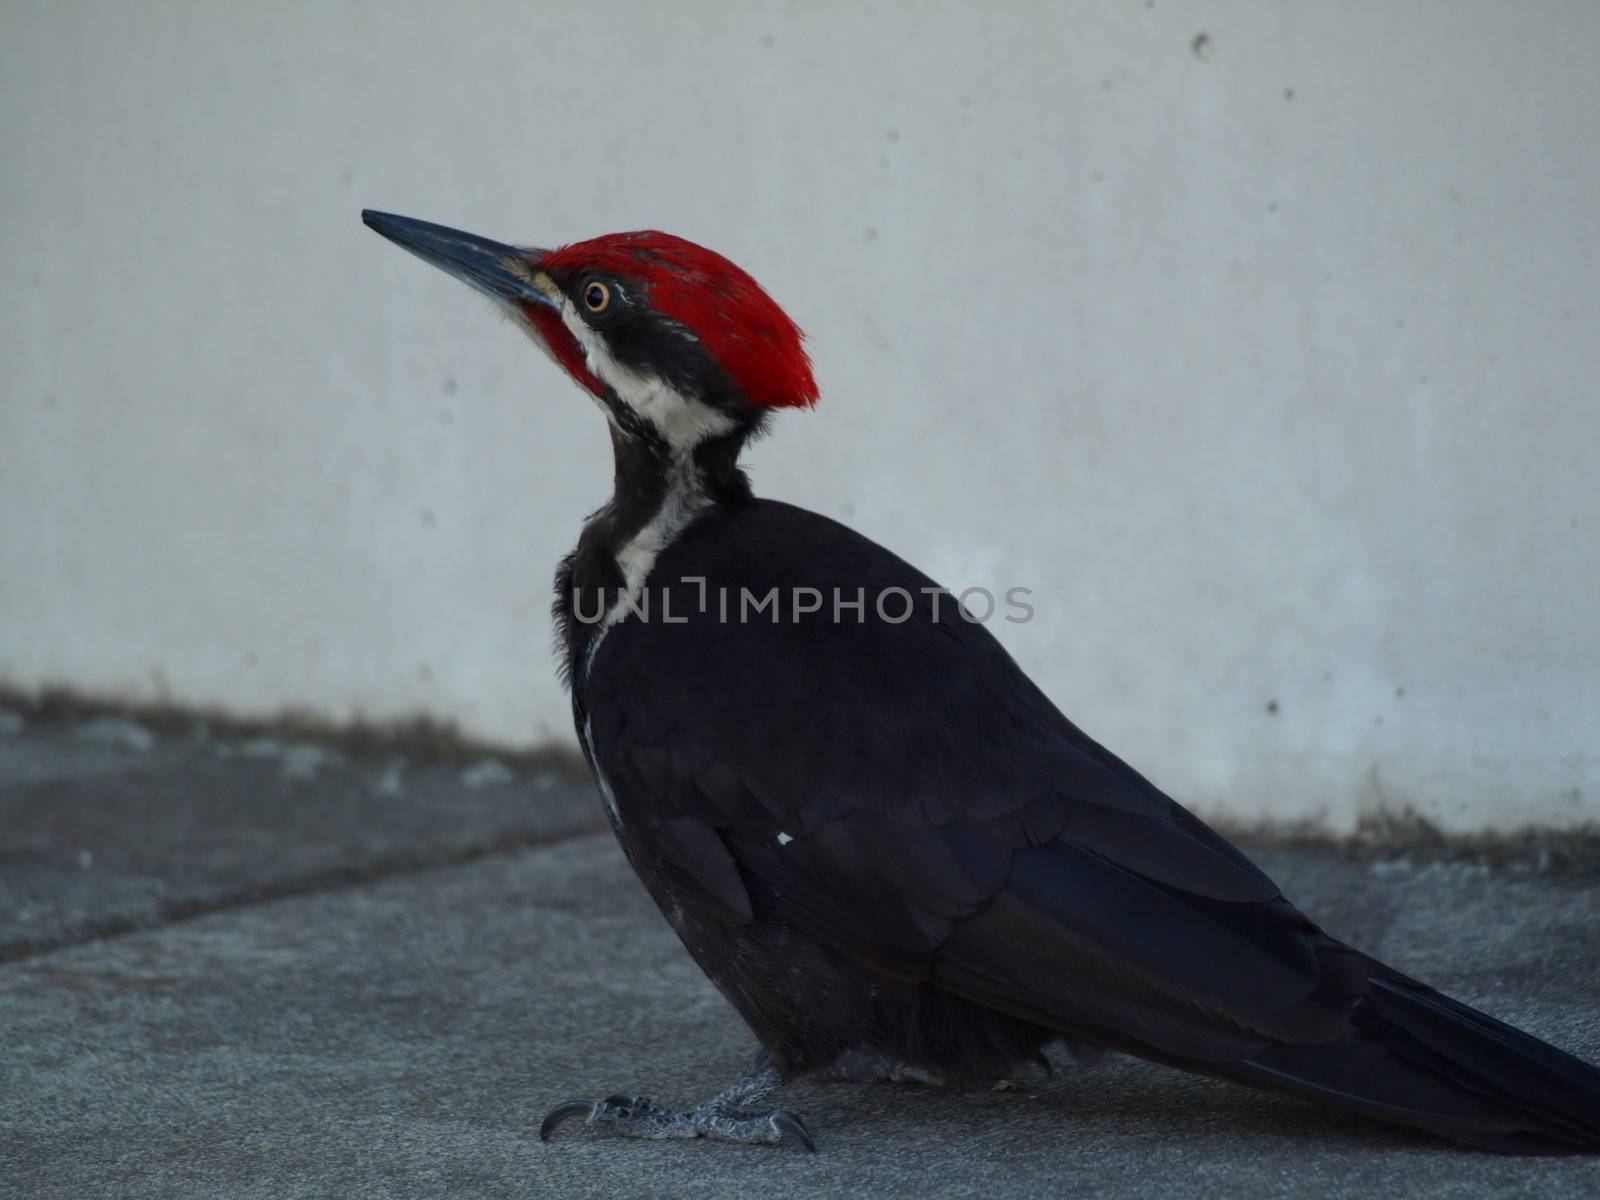 A Pileated Woodpecker standing on the ground looking up